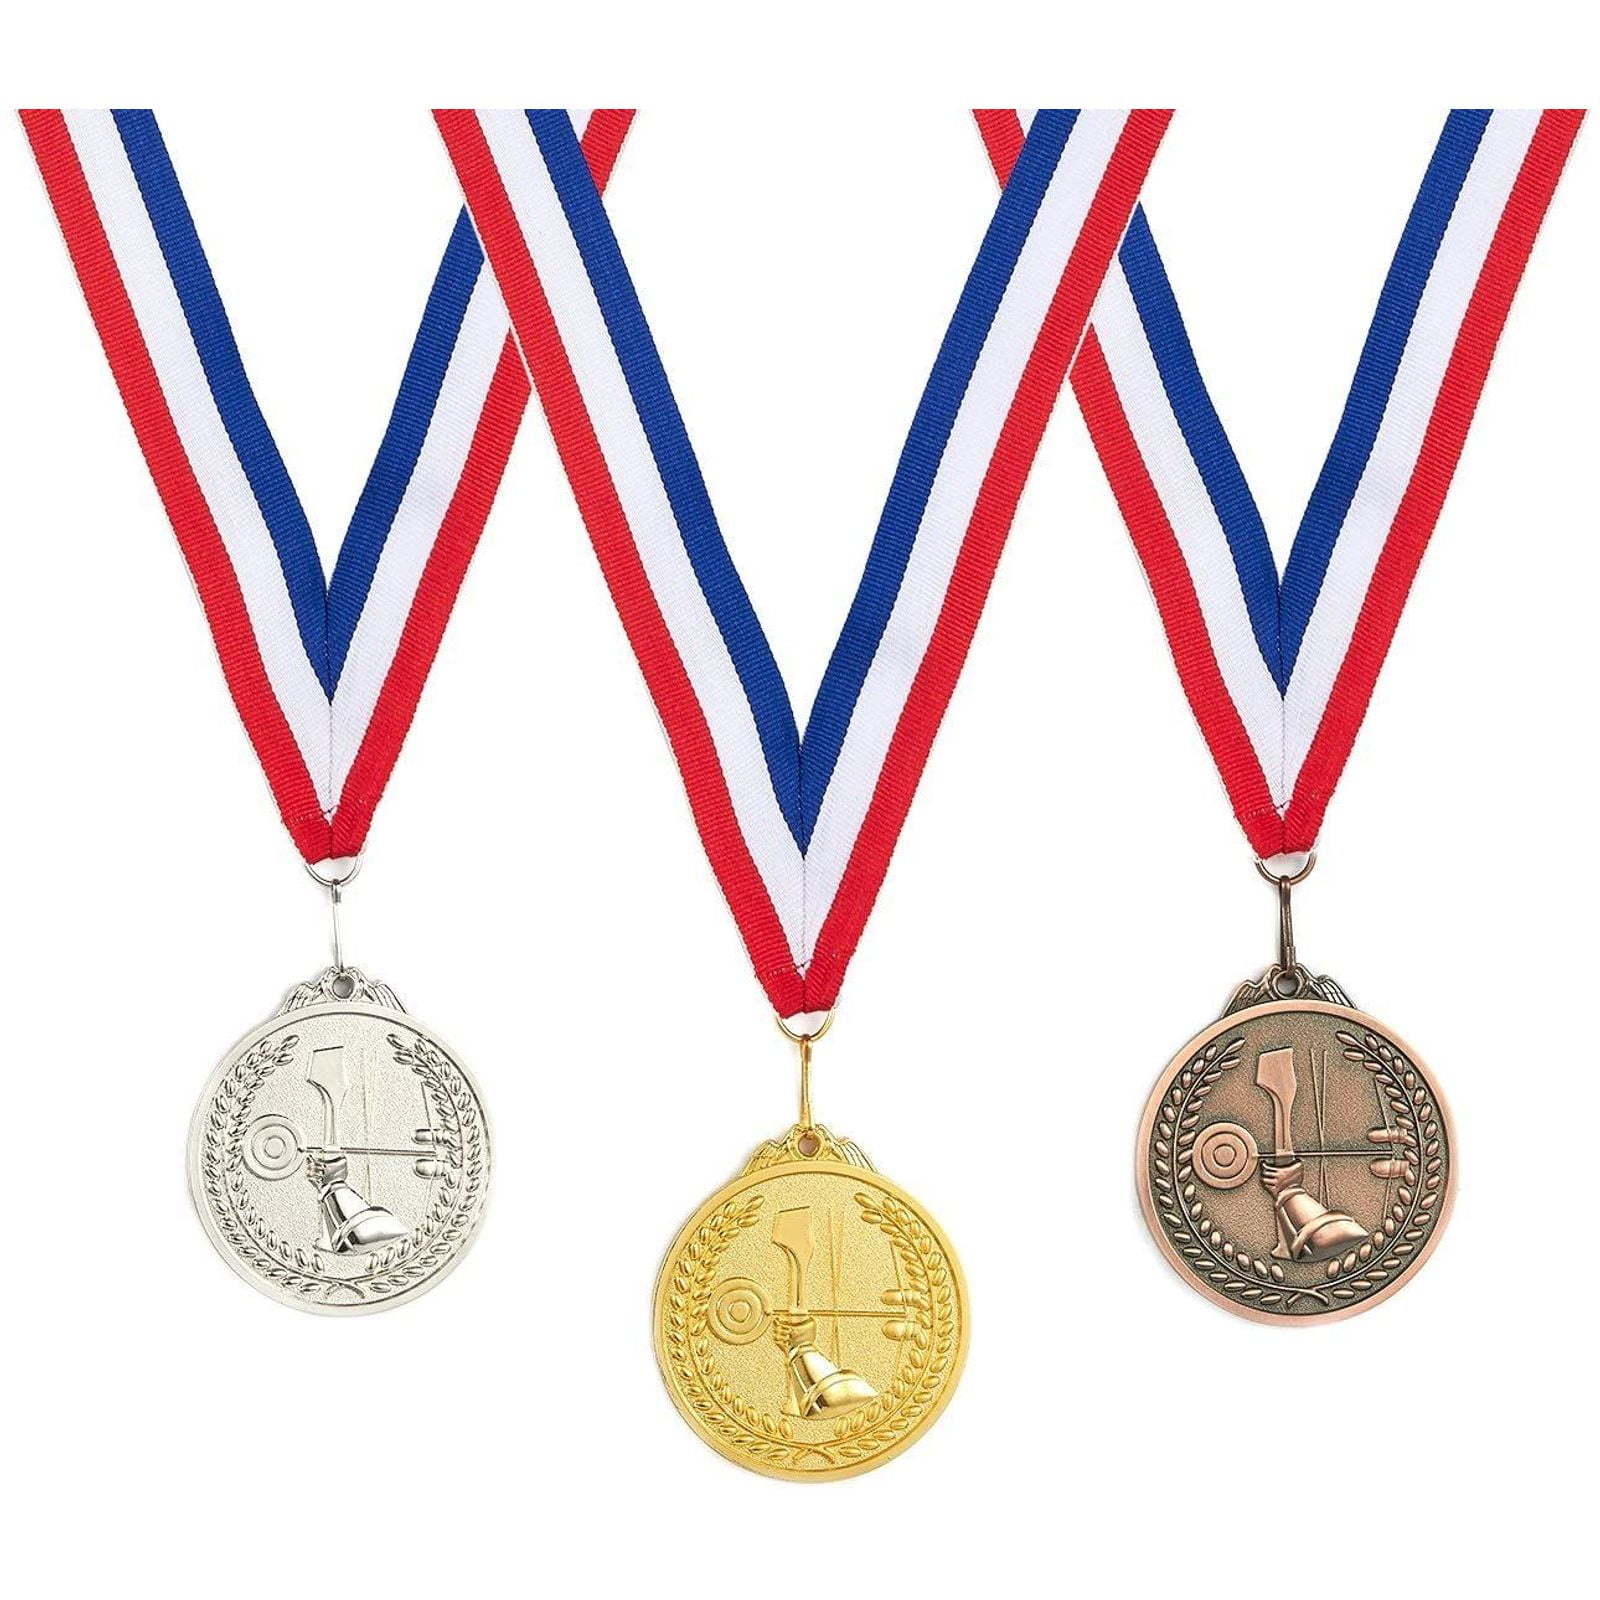 large gold HOCKEY medal with white neck ribbon trophy 2 1/2" diameter 